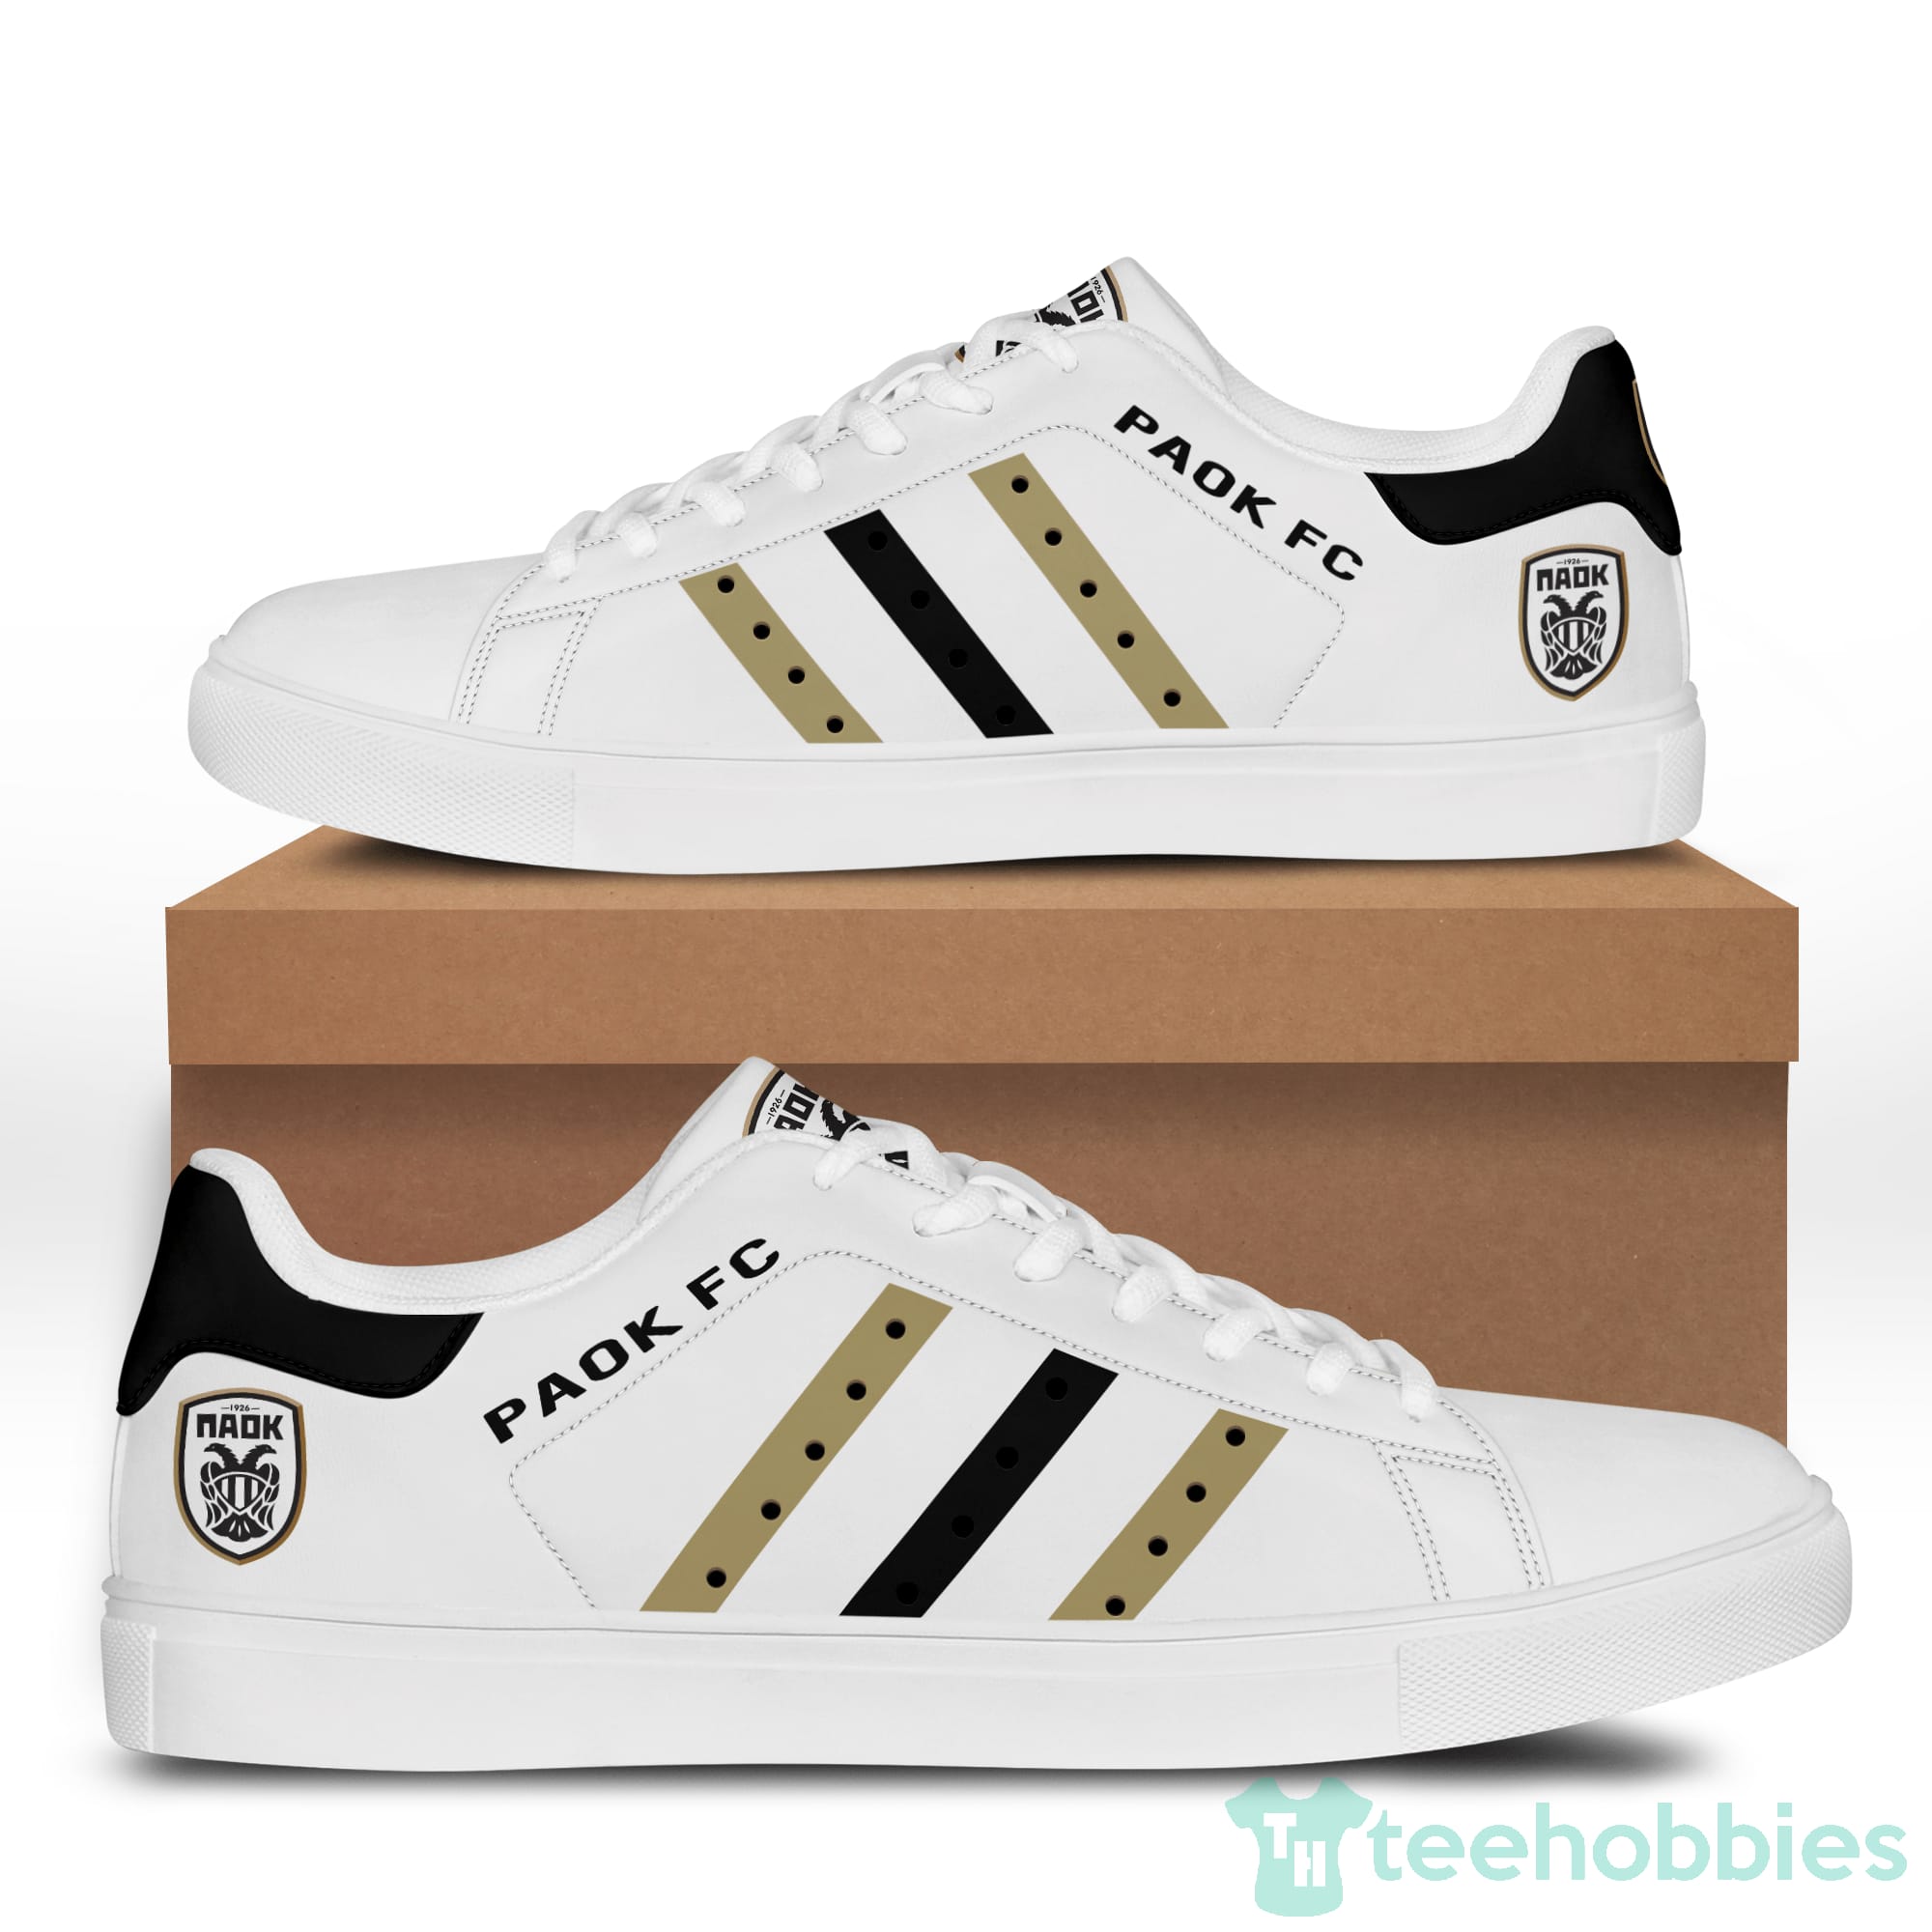 Paok Fc Fans White Low Top Skate Shoes Product photo 1